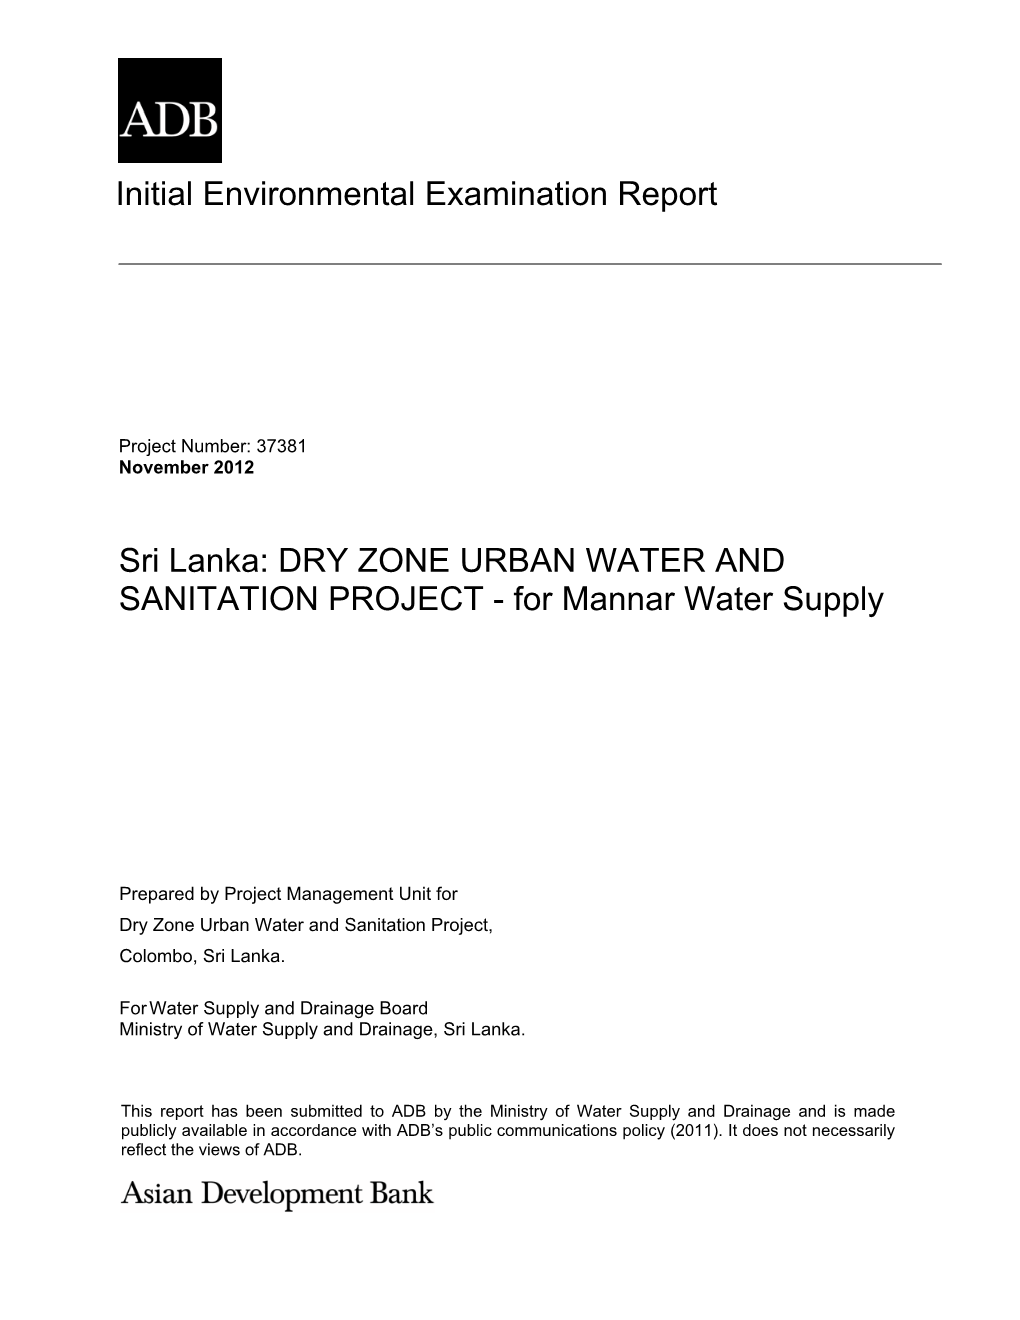 IEE: SRI: Dry Zone Urban Water and Sanitation Project: Mannar Water Supply